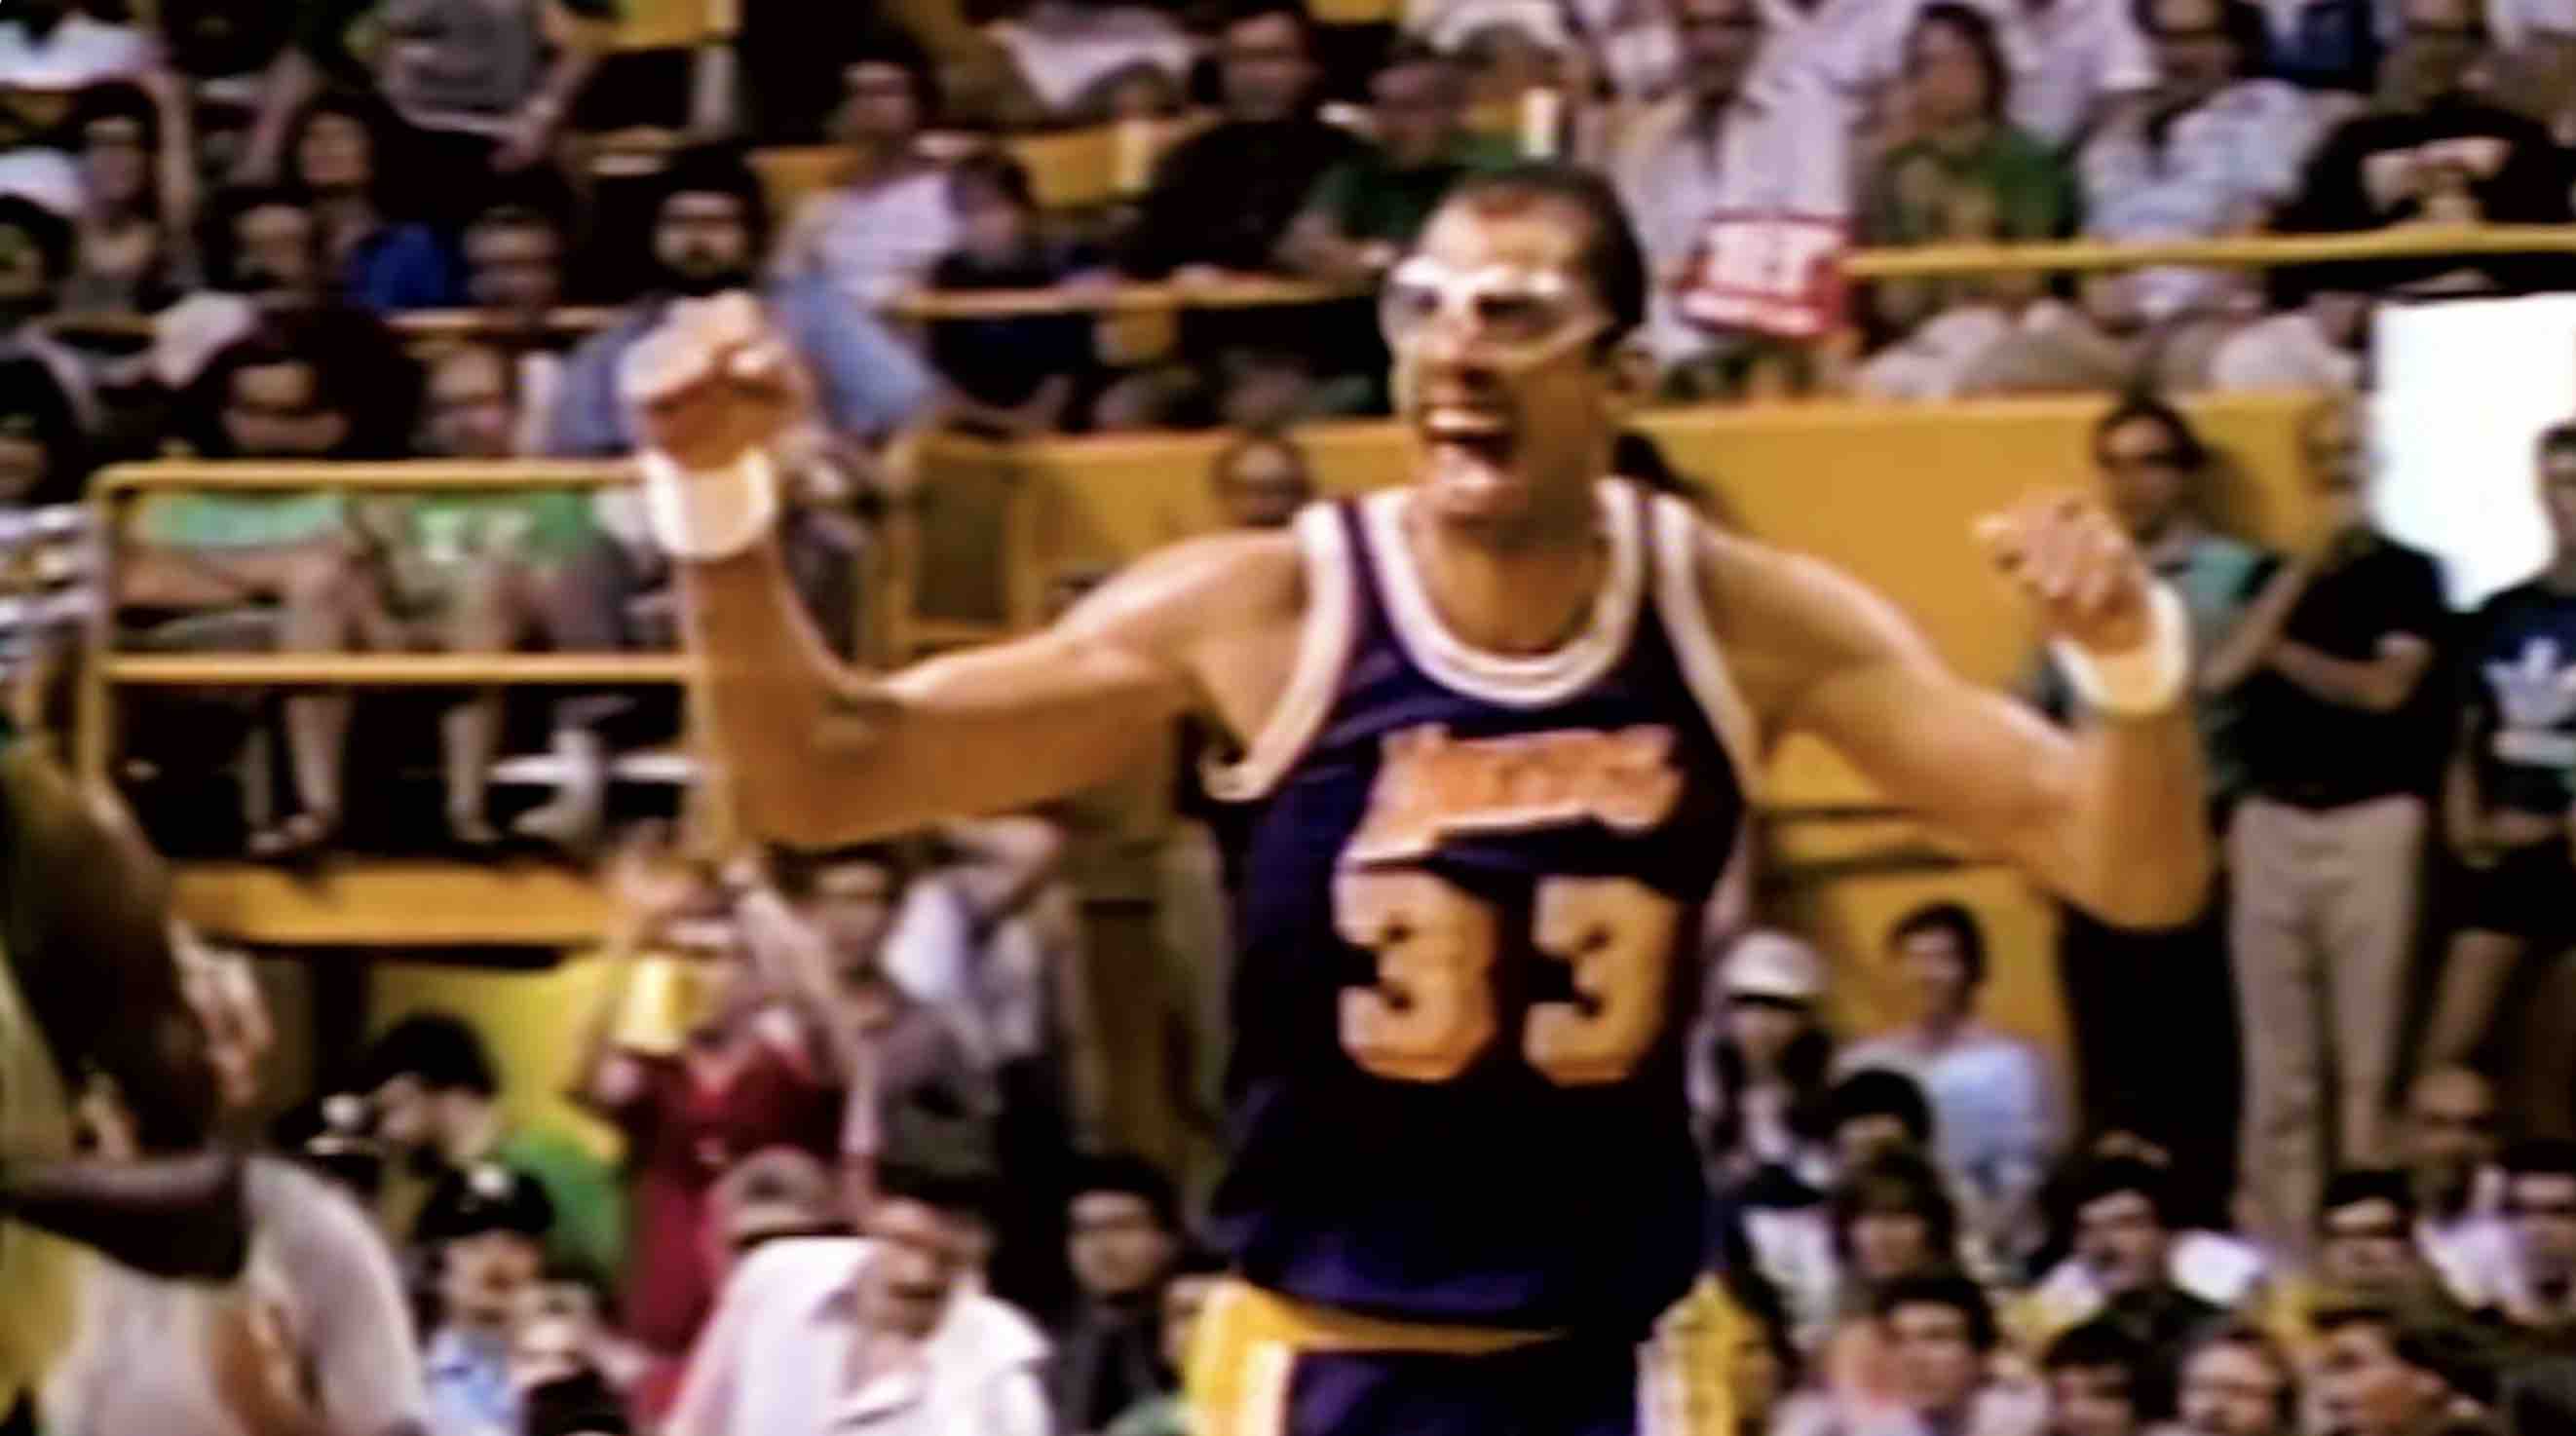 Get your goggles on: Any GOAT discussion must include Kareem Abdul